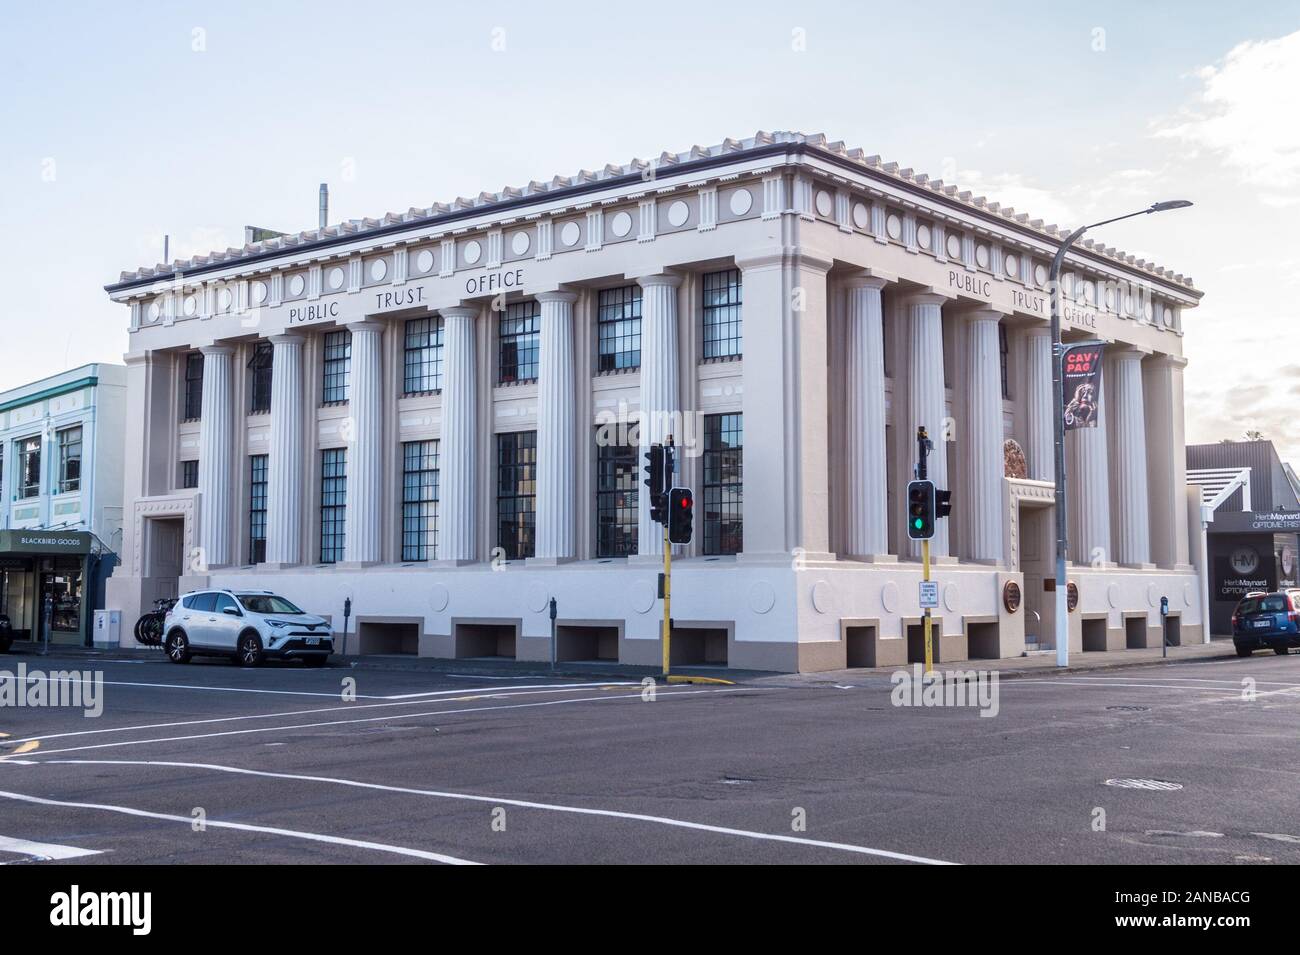 Public Trust Building, by Hyland & Phillips, 1922, Napier, Hawke's Bay, North Island, New Zealand Stock Photo